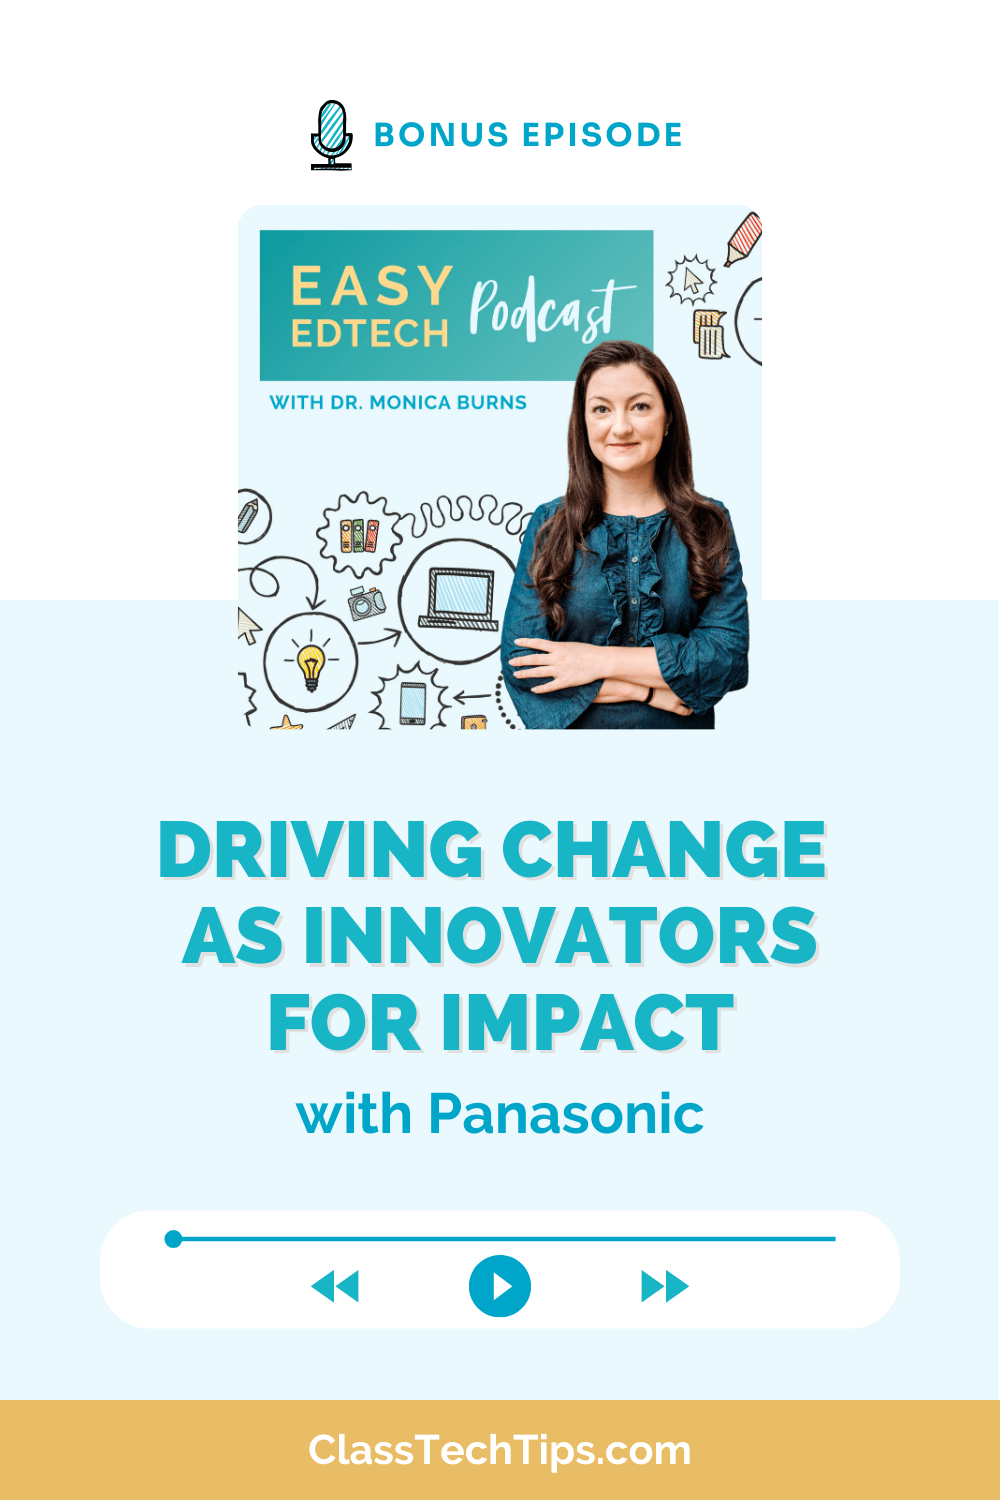 Discover how Panasonic and educational leaders are driving change as innovators for impact in this bonus episode of the Easy EdTech Podcast with Dr. Monica Burns. The image showcases Dr. Monica Burns and the podcast's focus on innovation in education.